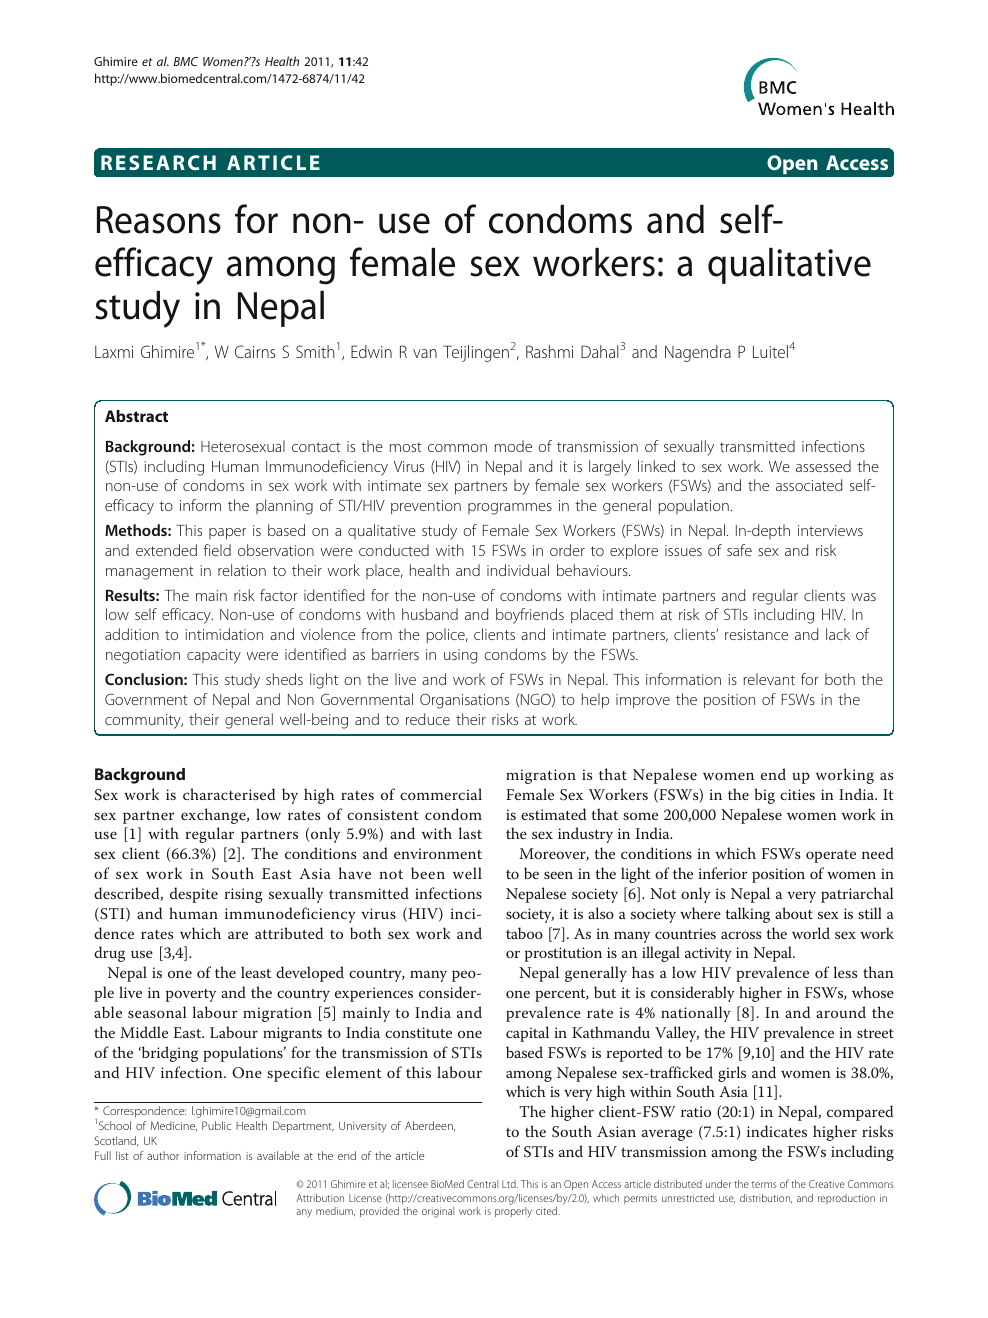 Reasons for non- use of condoms and self- efficacy among female sex workers a qualitative study in Nepal